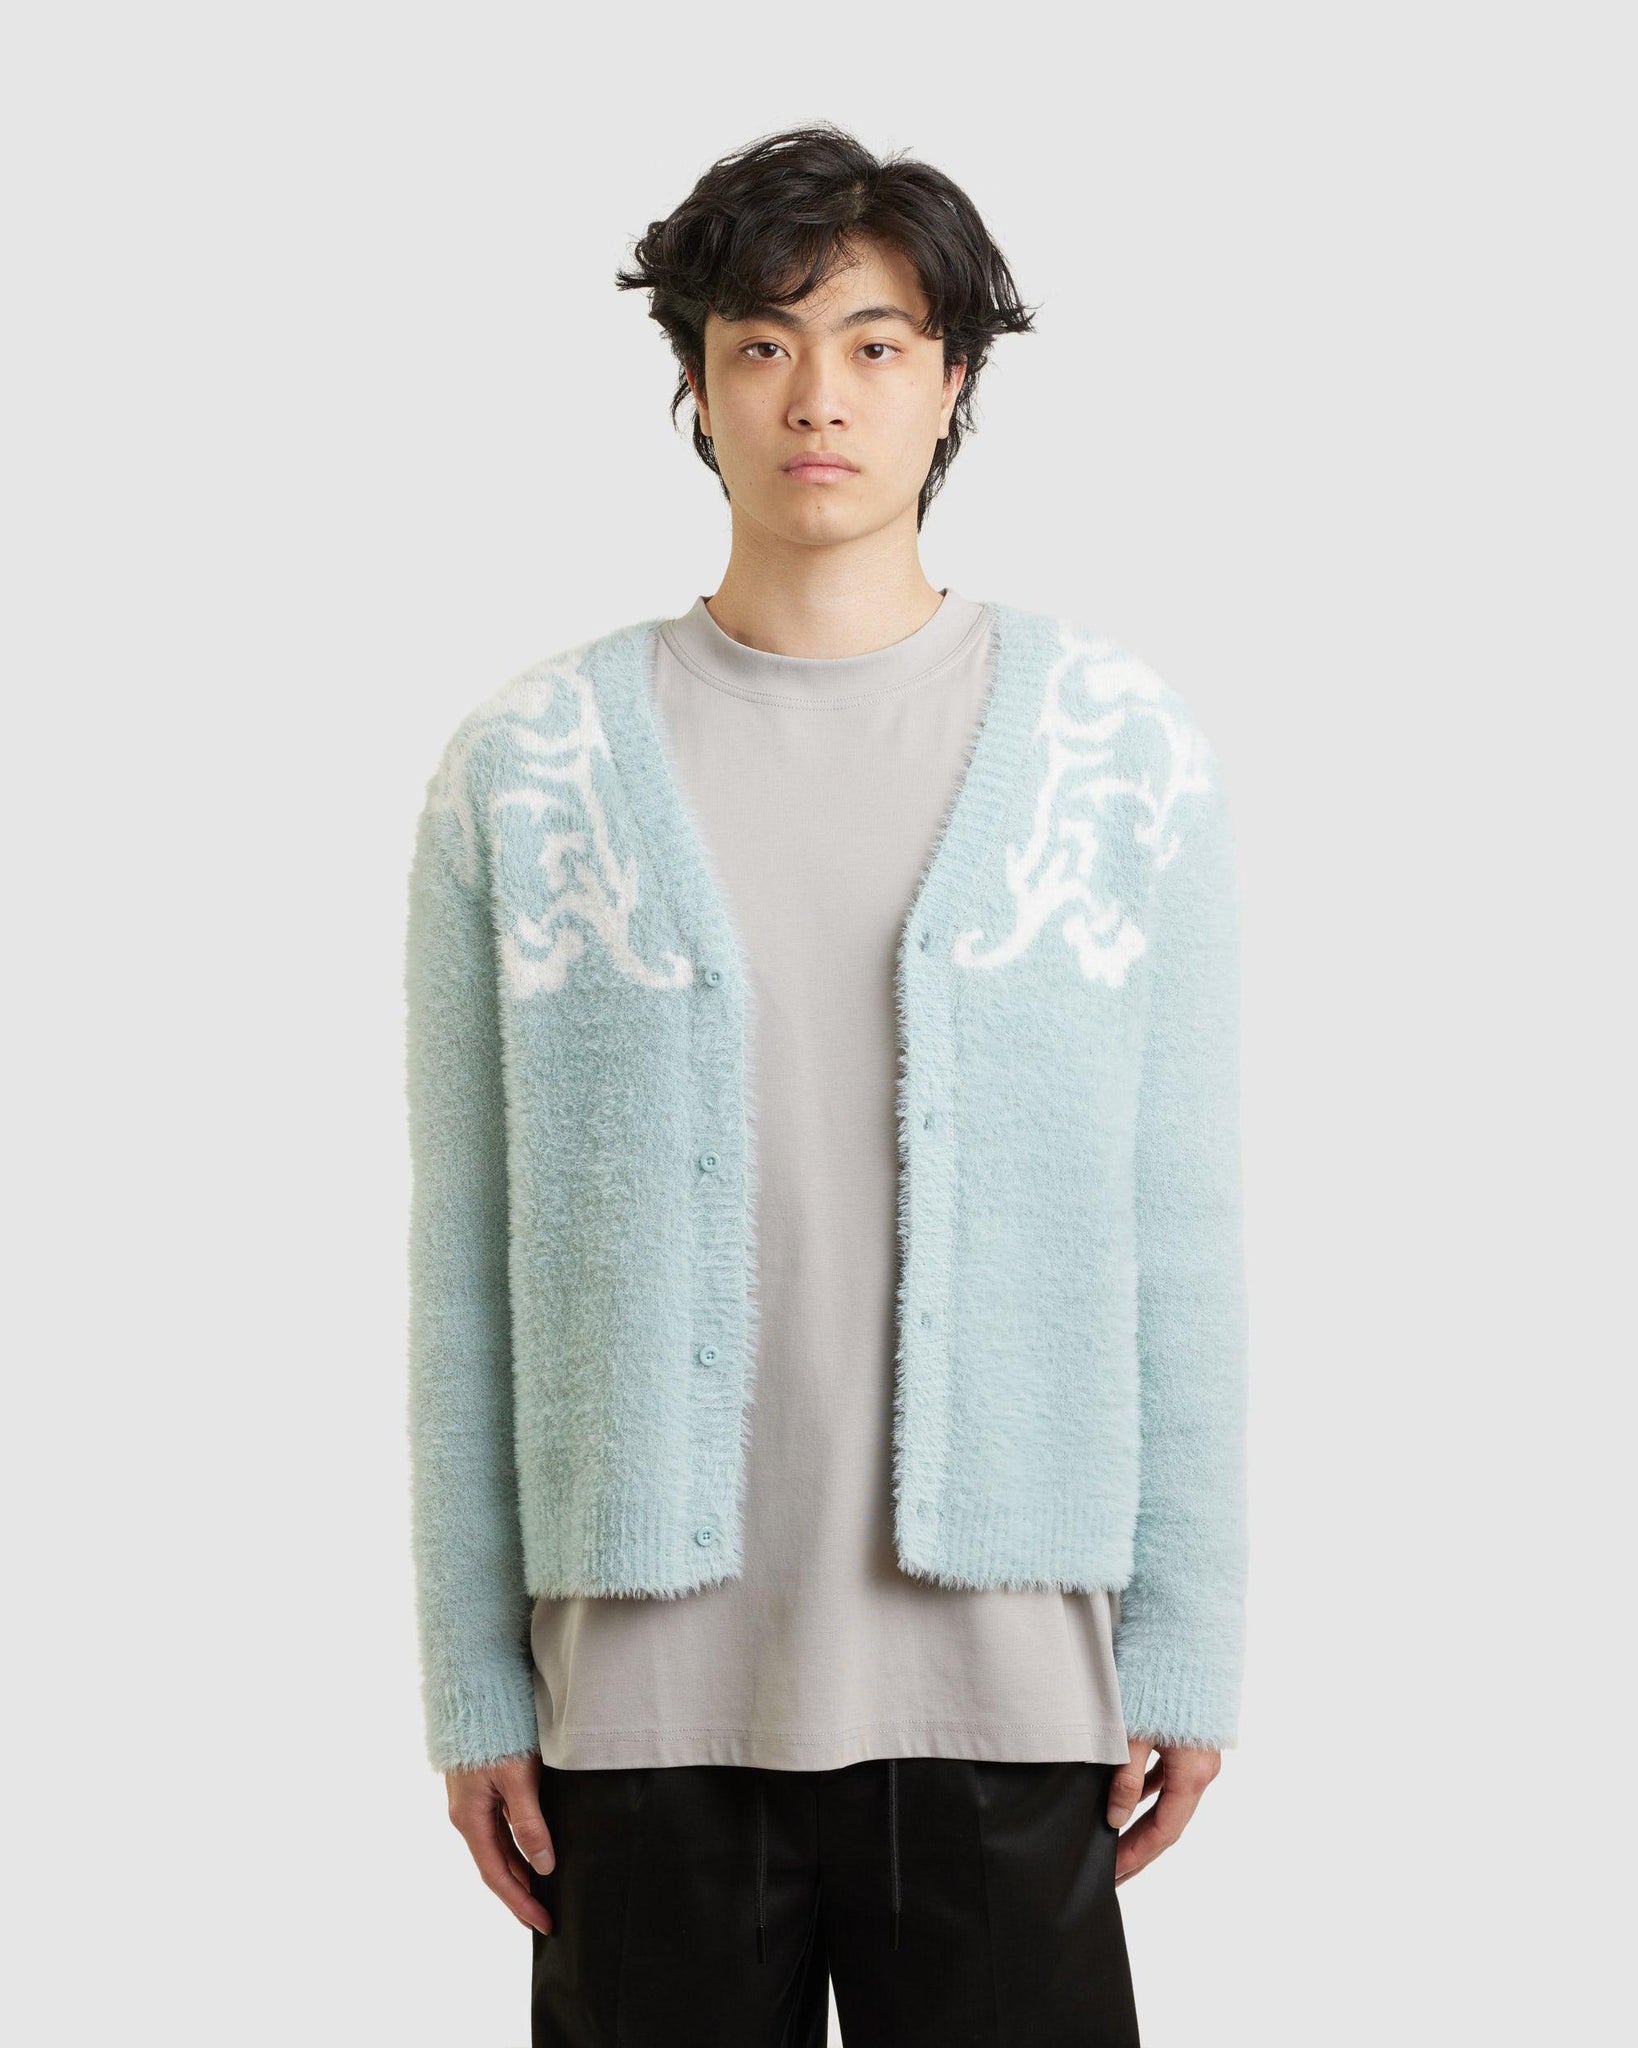 M. Hanger Western Hairy Cardigan Light Blue - {{ collection.title }} - Chinatown Country Club 